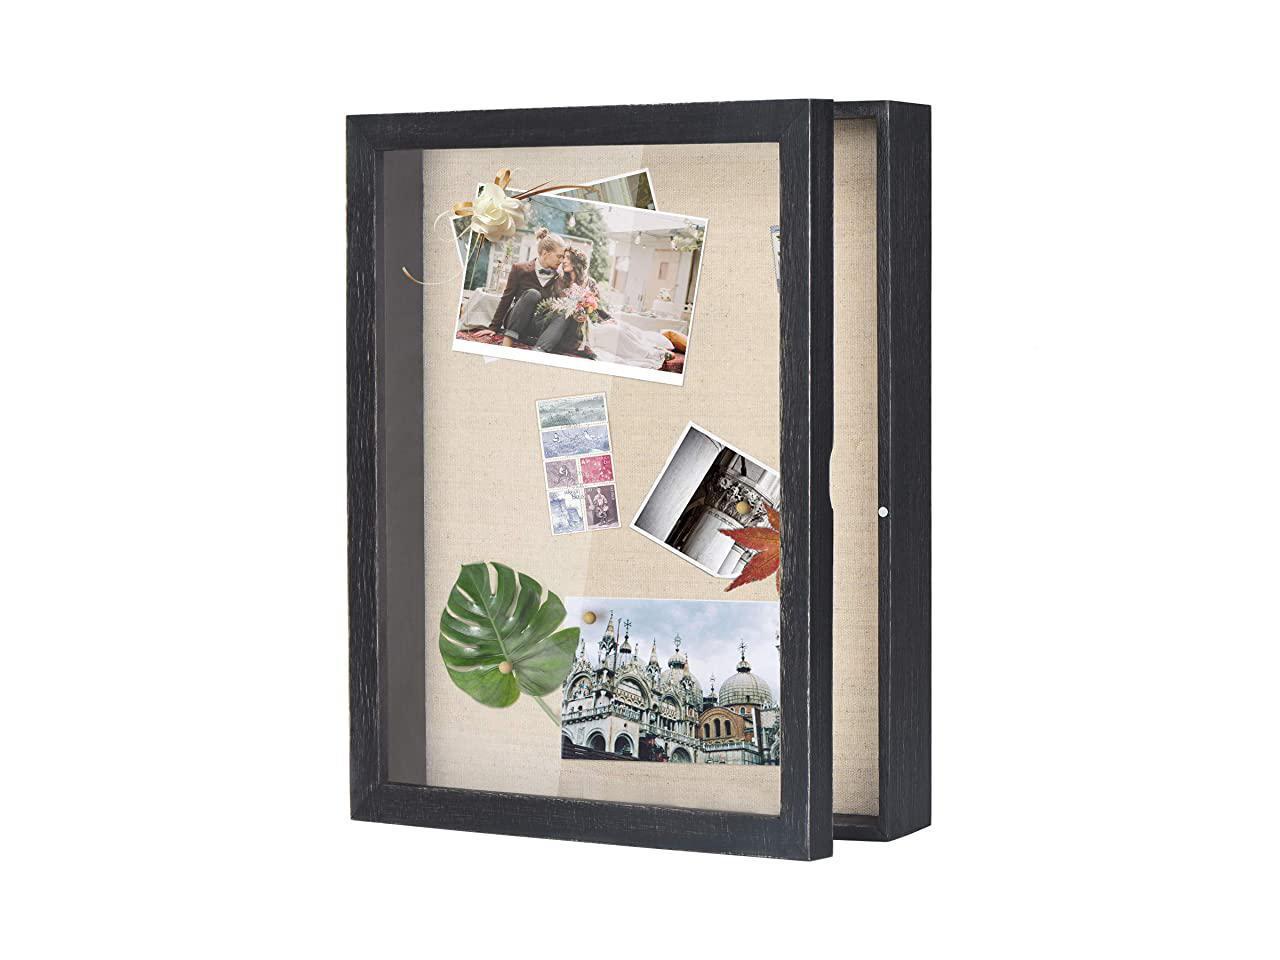 GraduatePro Shadow Box Frame 11x14 Display Case Black with Linen Background and 6 Stick Pins Memorabilia Awards Medals Photos Memory Box